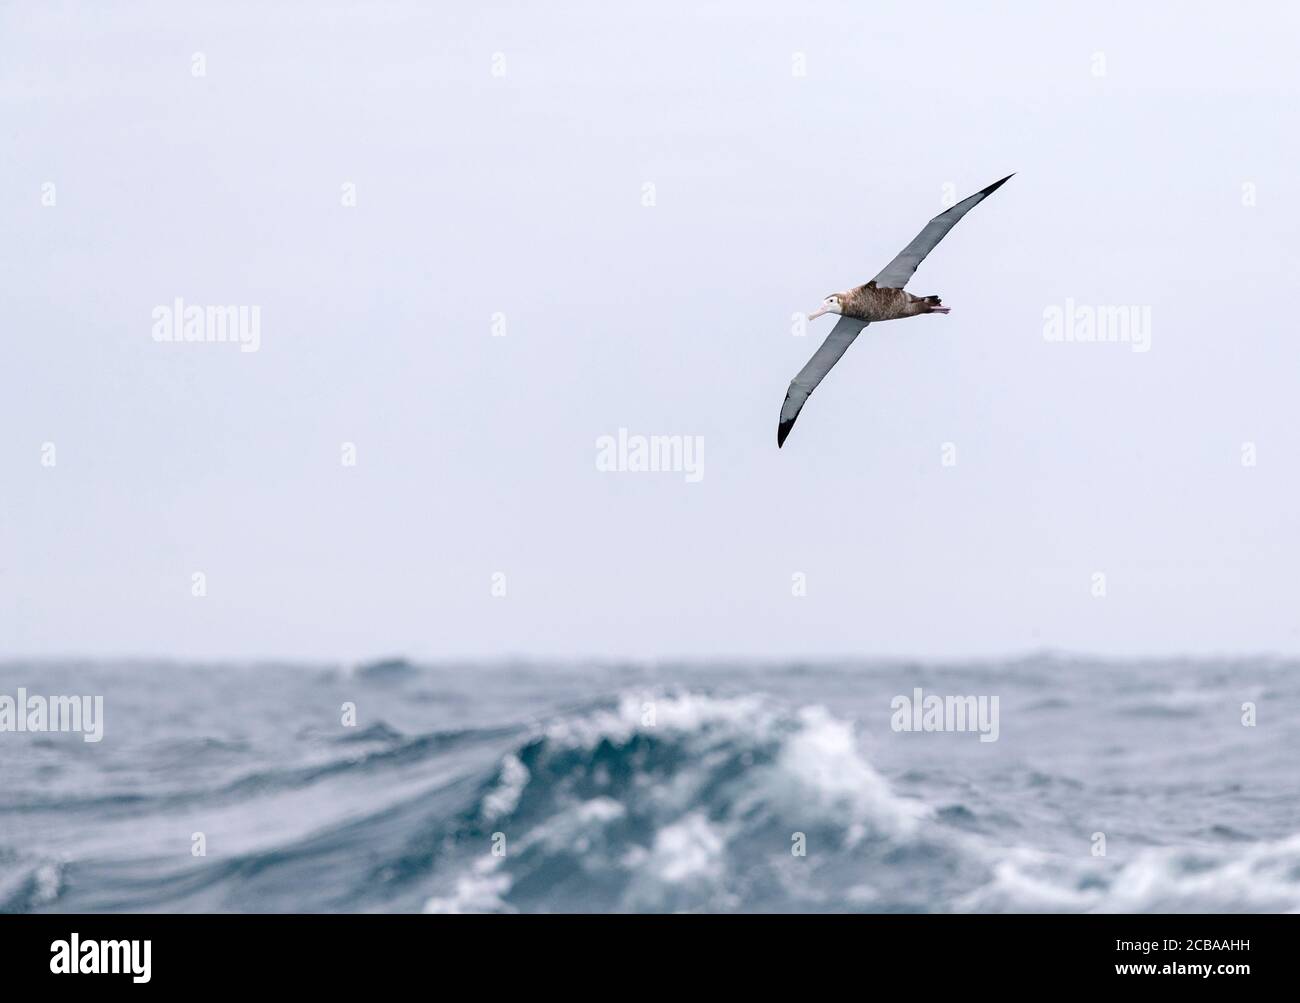 Antipodean Albatross (Diomedea antipodensis), Immature flying over the New Zealand subantarctic Pacific Ocean, arcing high above the ocean with huge waves, New Zealand, Aucklands islands Stock Photo